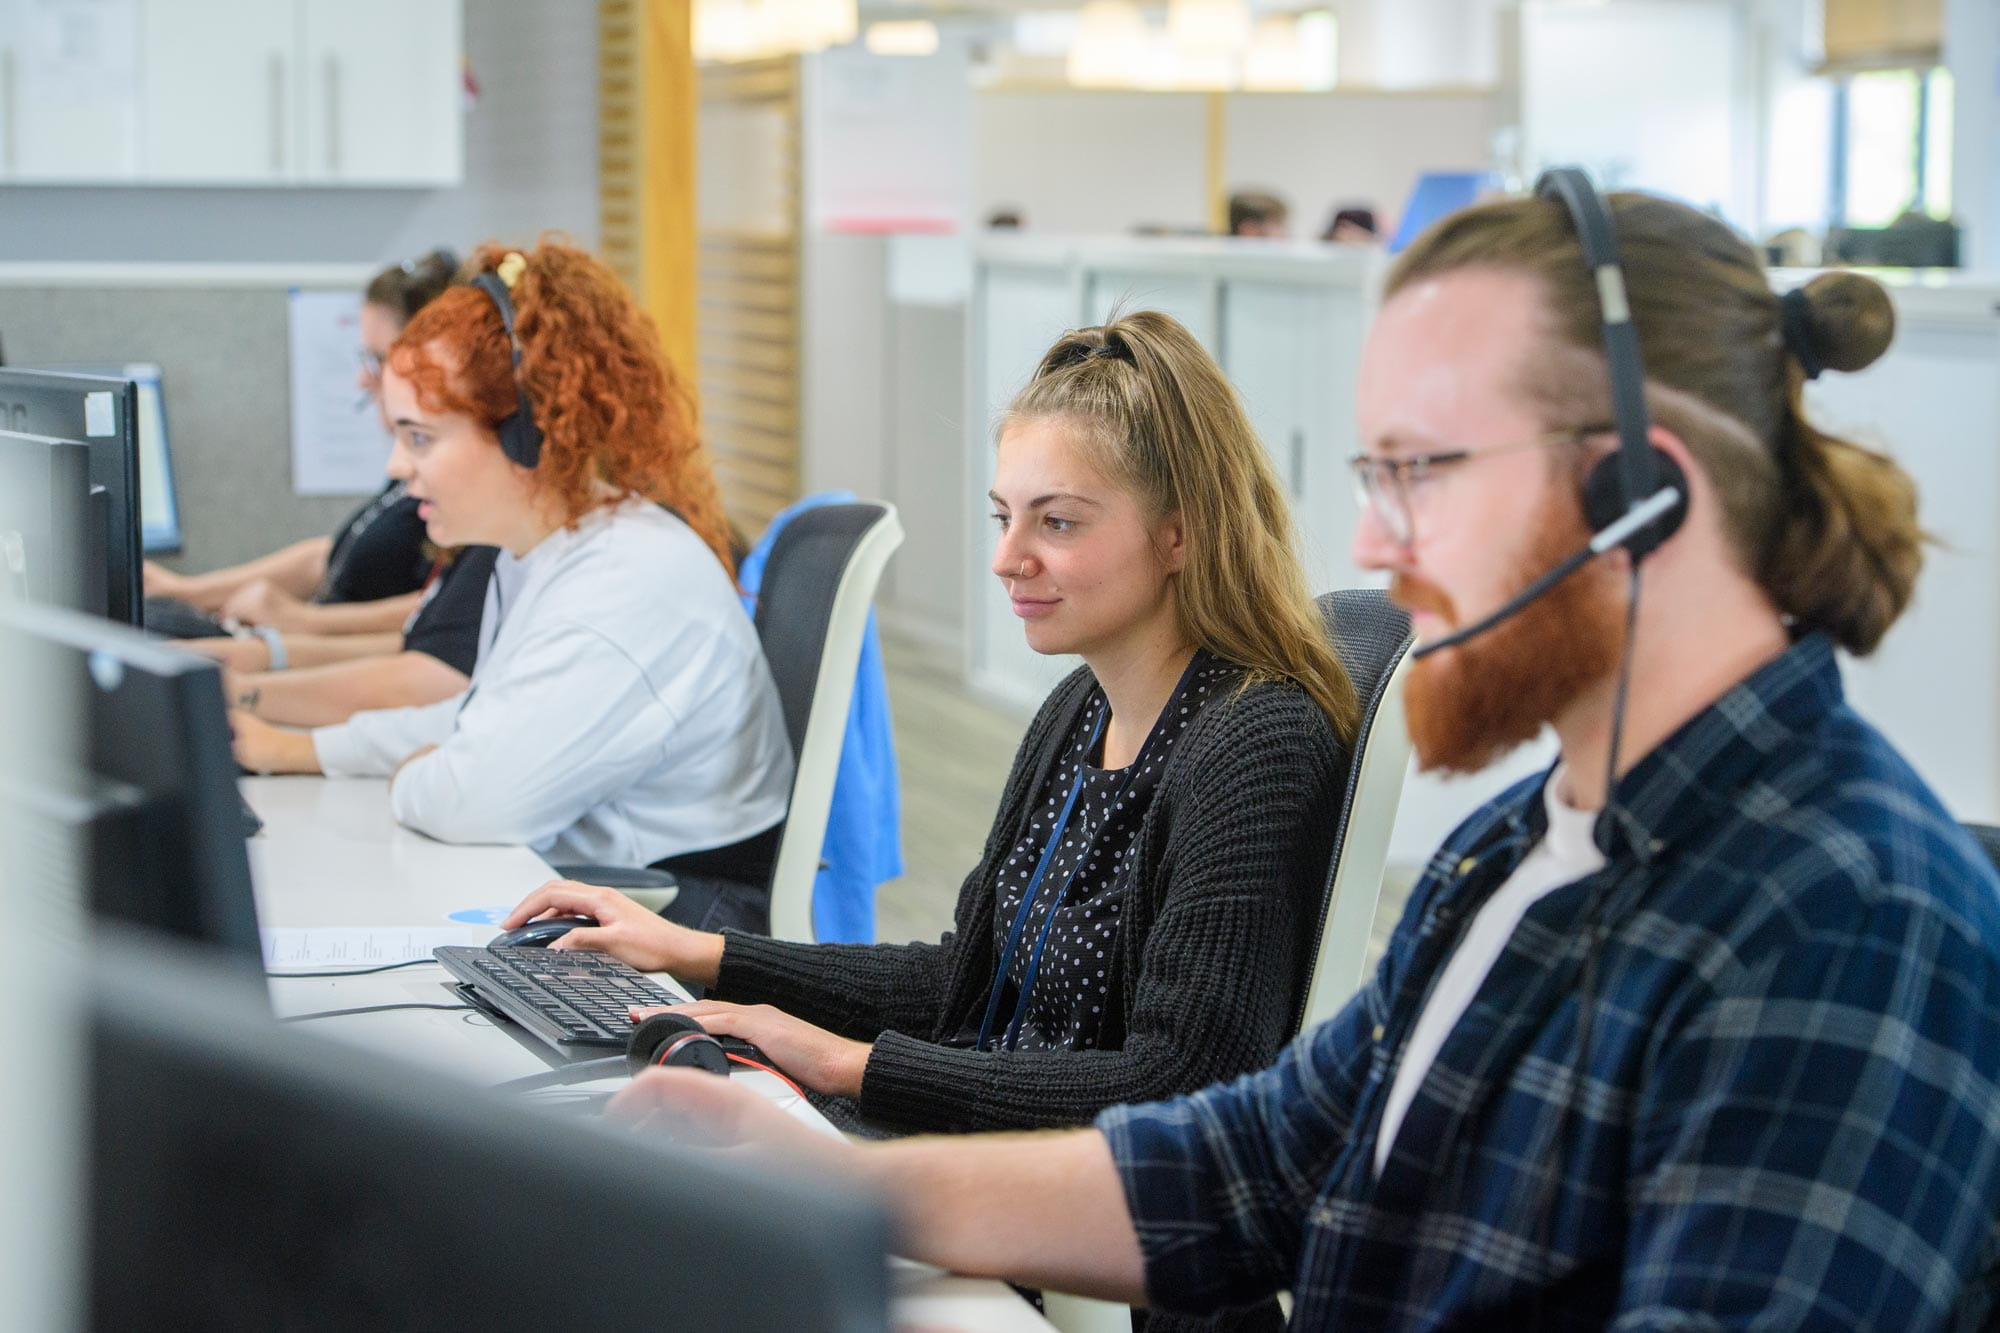 Contact us. This image shows 3 people working at desks in our call centre. Two of them are wearing headsets, the third is typing on a keyboard.